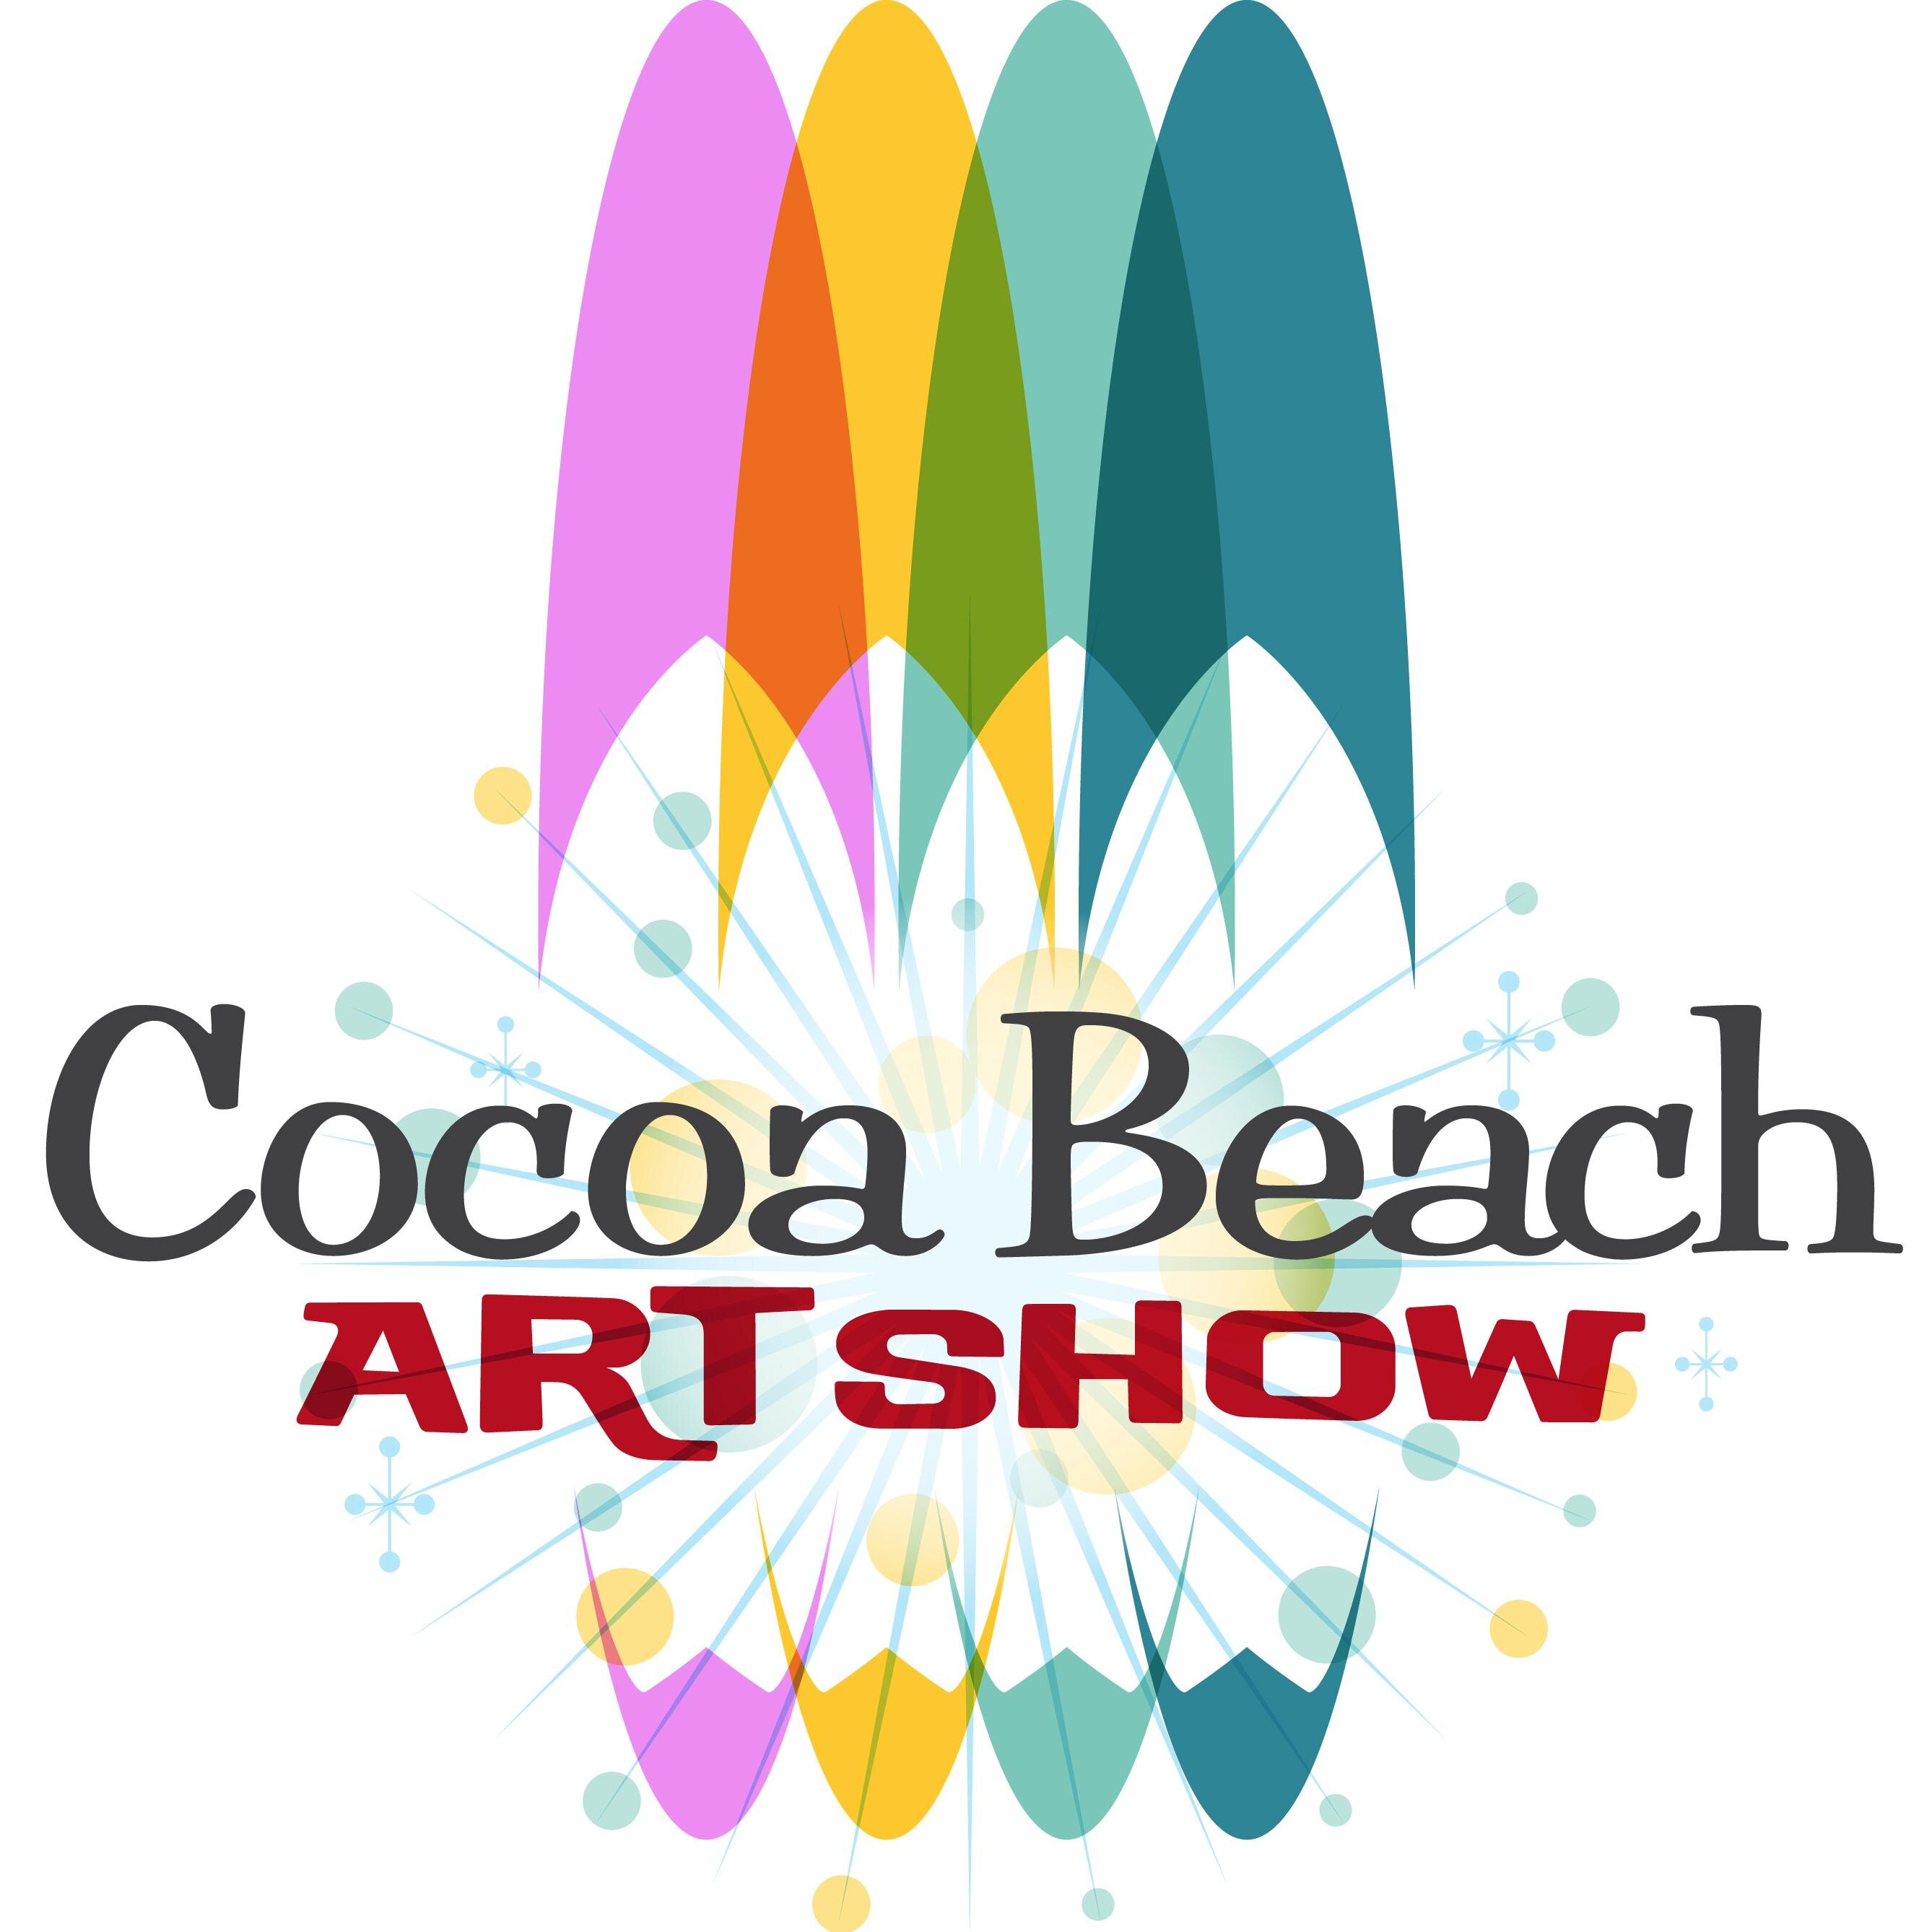 Cocoa Beach Art Show held annually in downtown Cocoa Beach during the Thanksgiving weekend. Enjoy quality Art, Music, Food and Community!